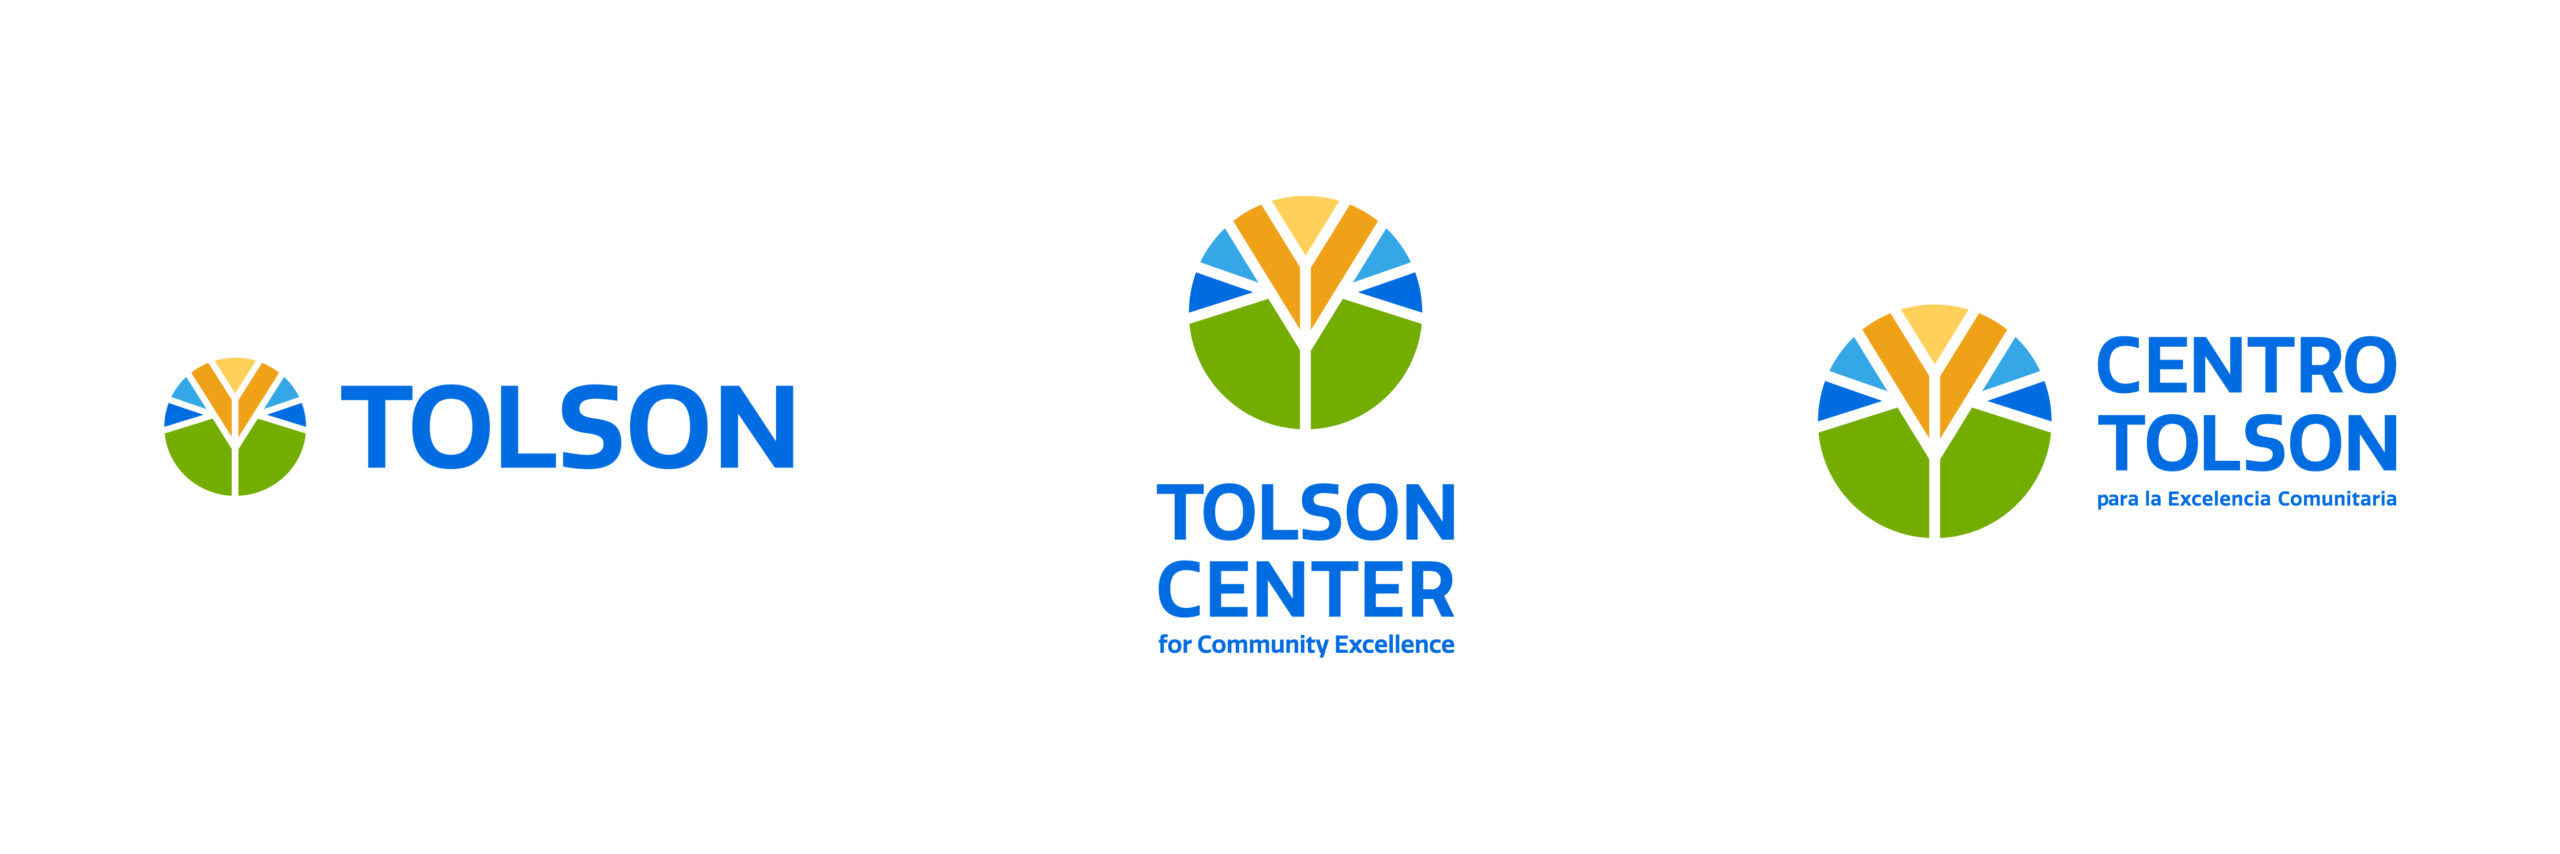 Tolson Center for Community Excellence Logo Lockups